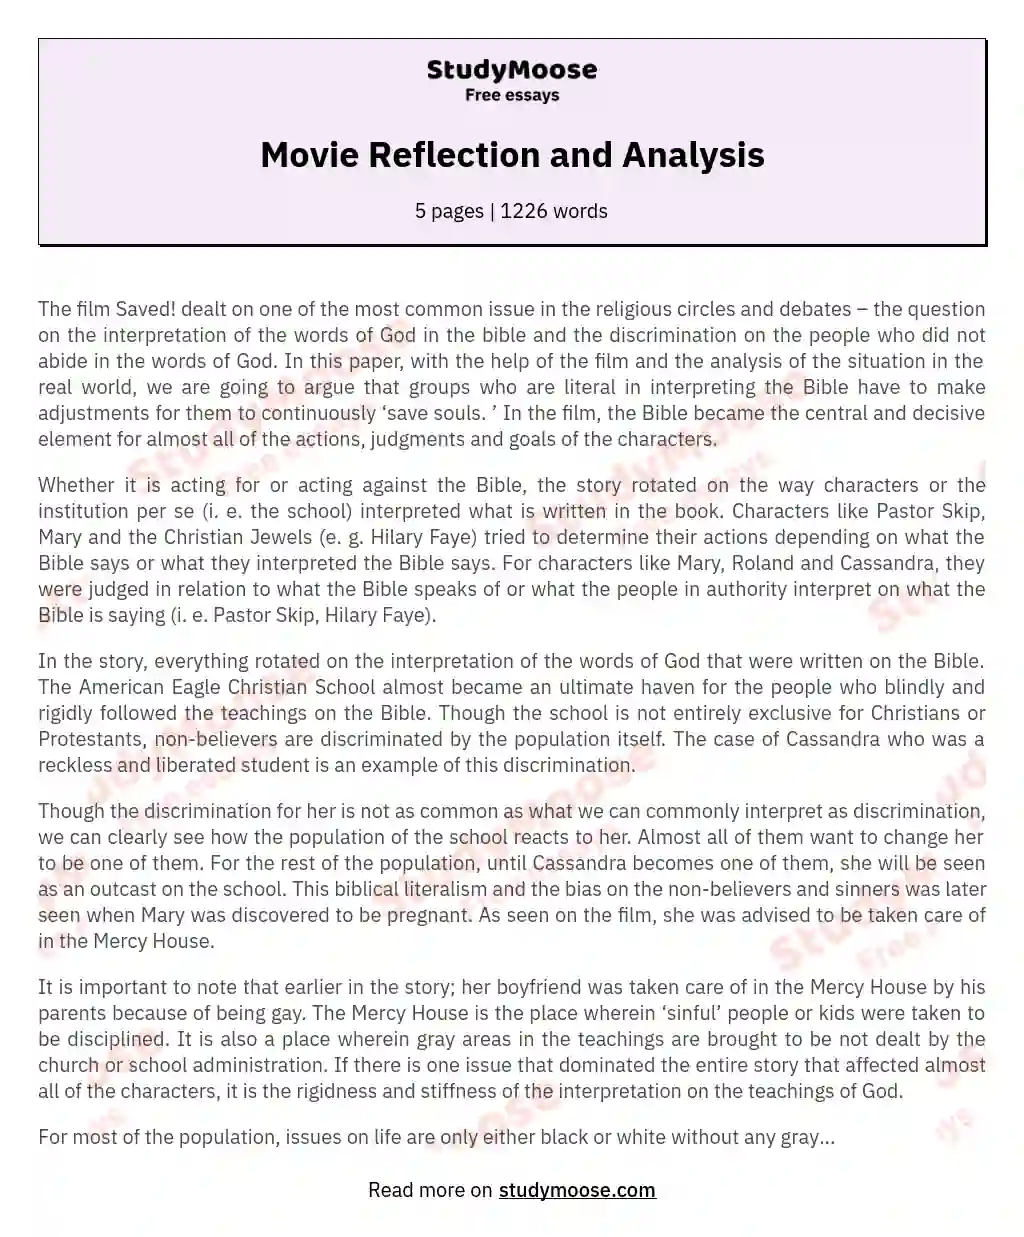 Movie Reflection and Analysis essay